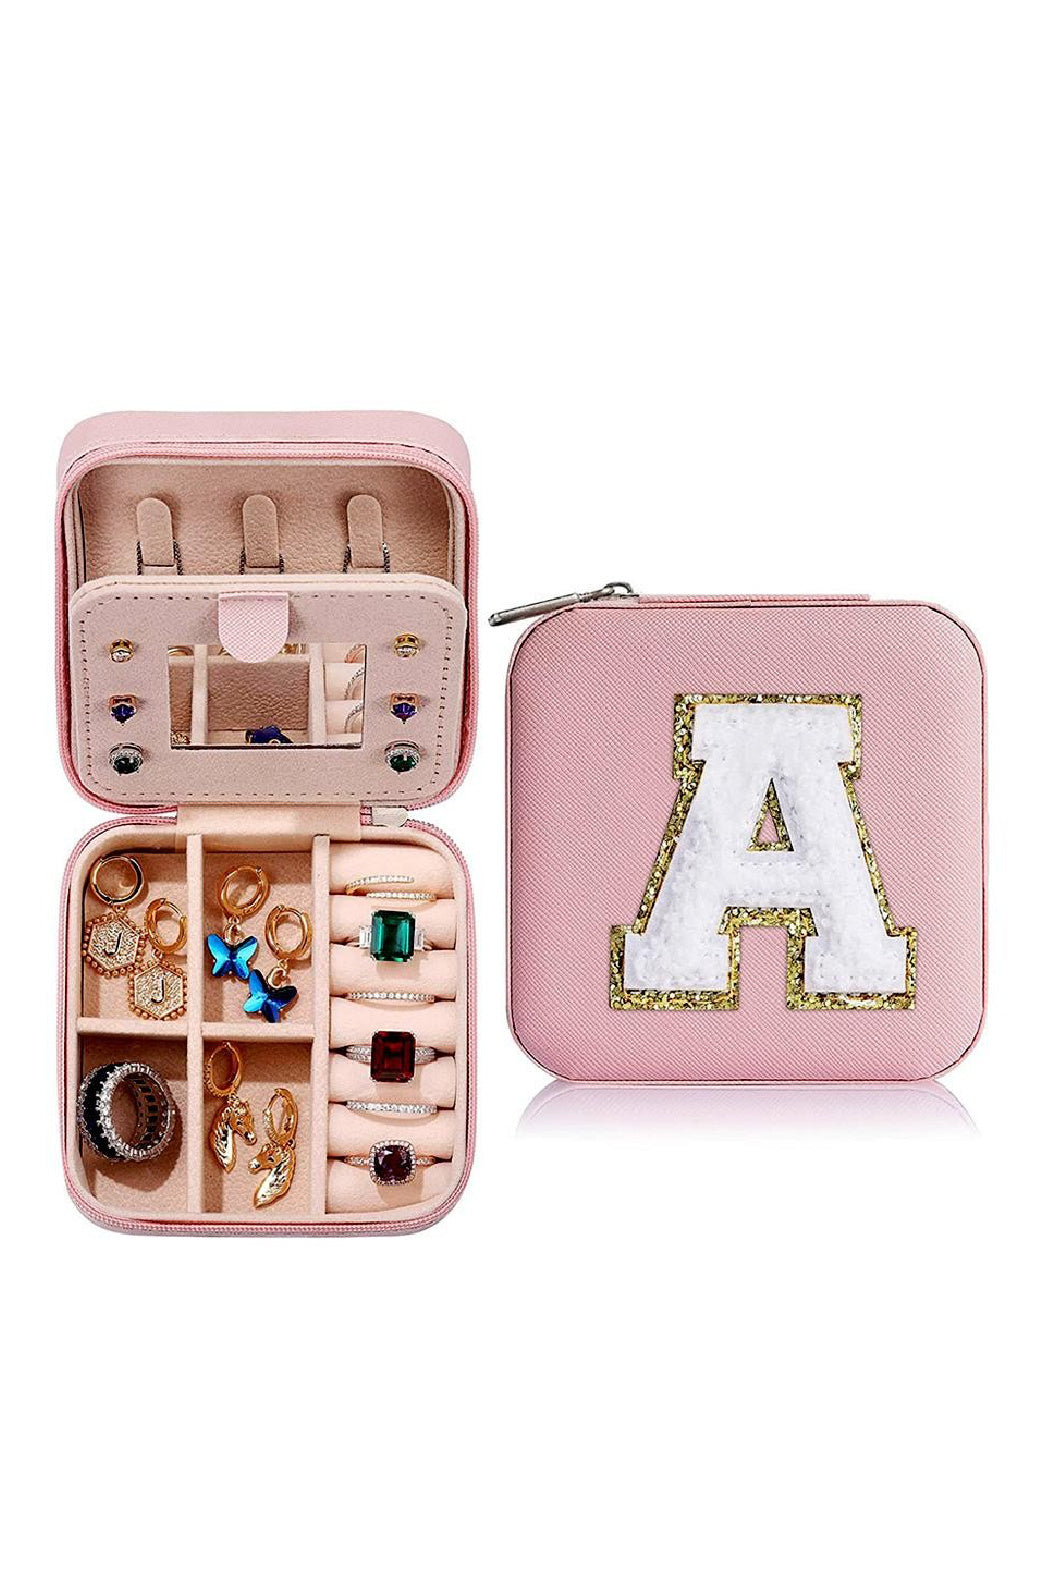 Chenille Lettered Little Pink Jewelry Box by Embellish Your Life